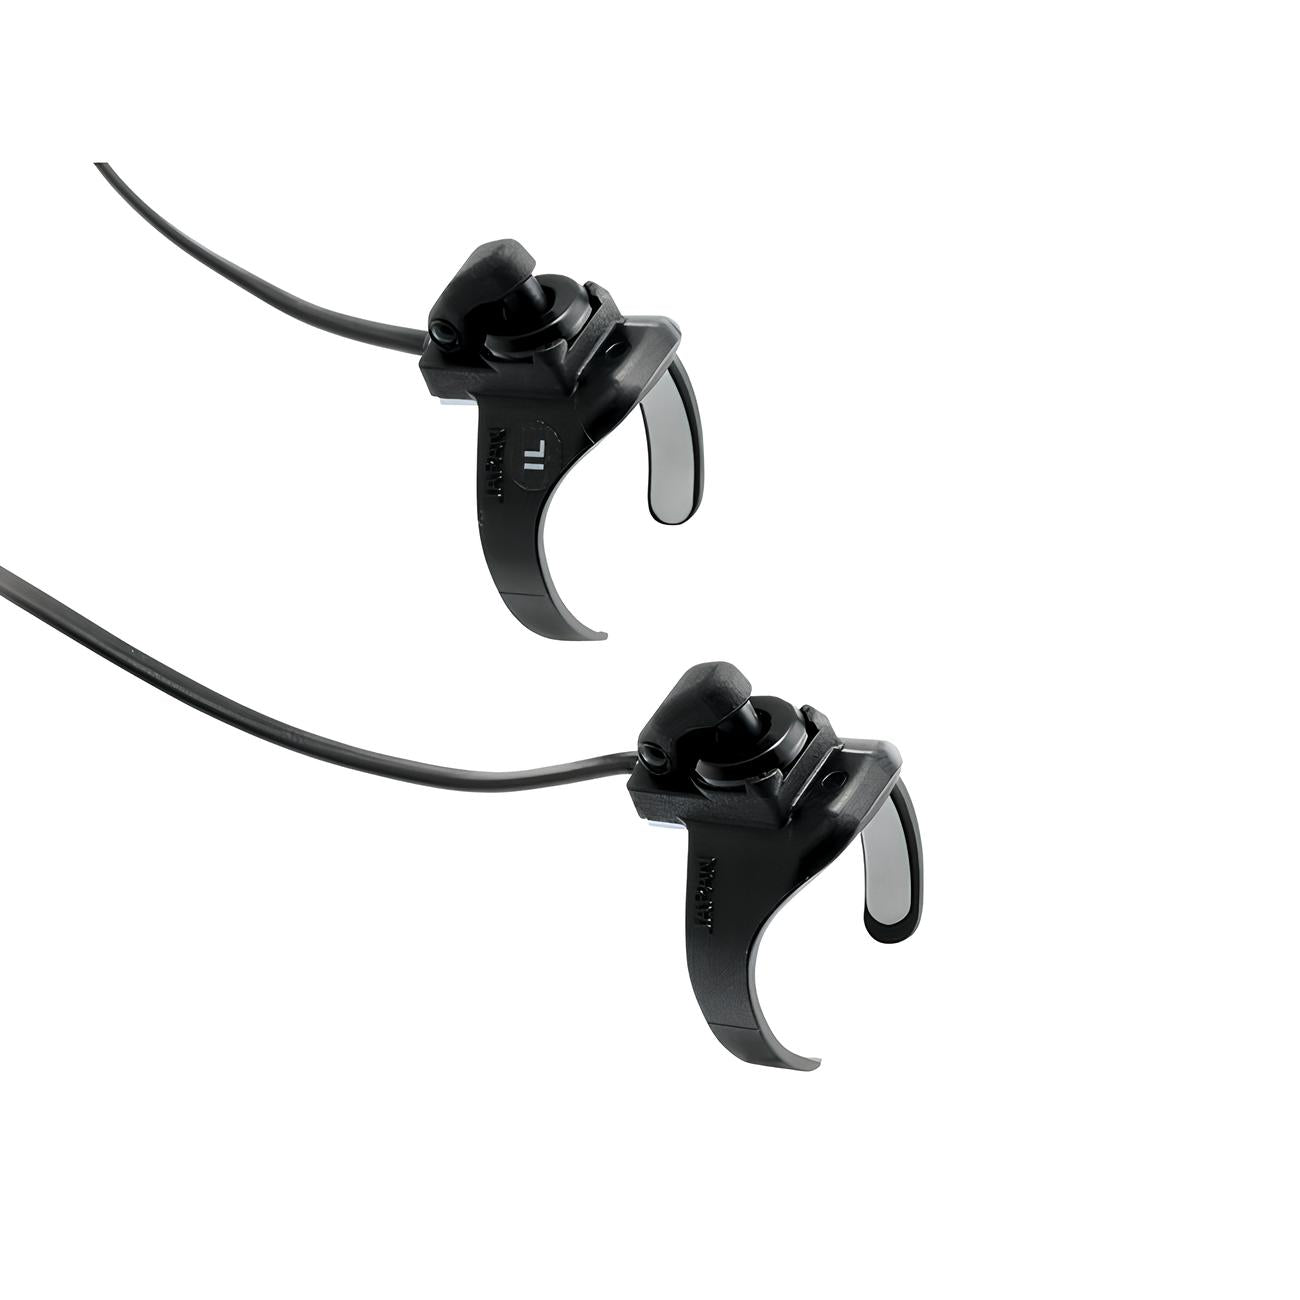 SHIMANO SW-R610 Di2 Sprint Shifter Switches Pair 2x11-Speed-Pit Crew Cycles